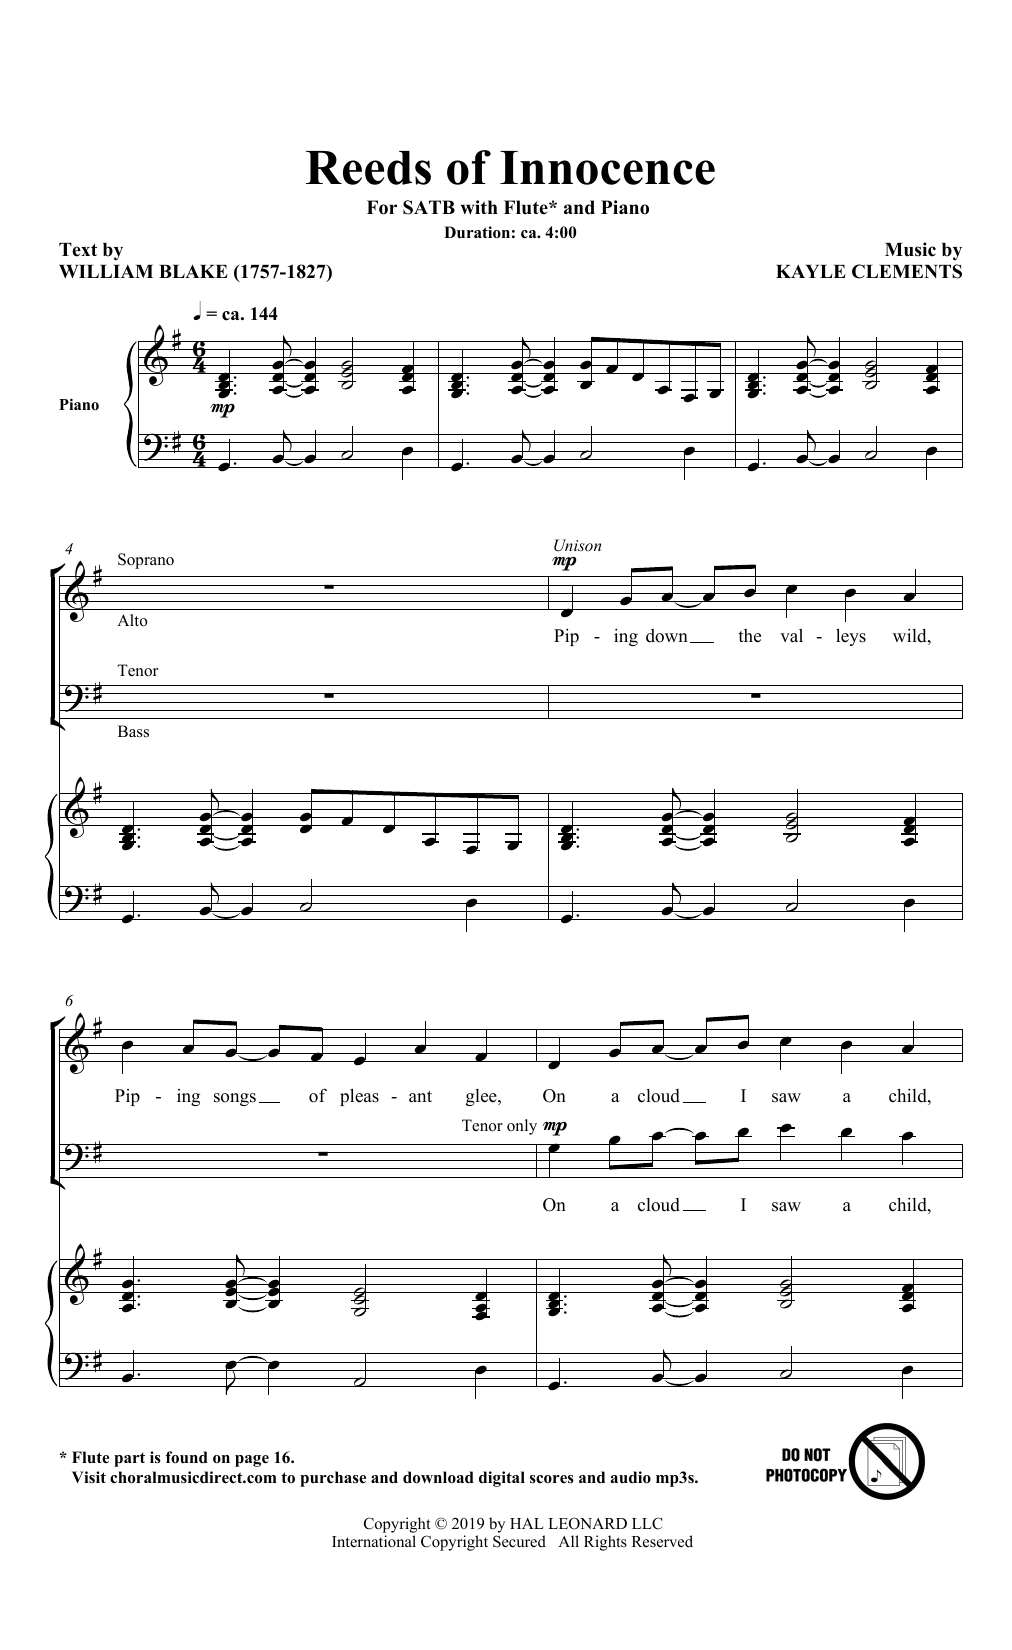 Download William Blake and Kayle Clements Reeds Of Innocence Sheet Music